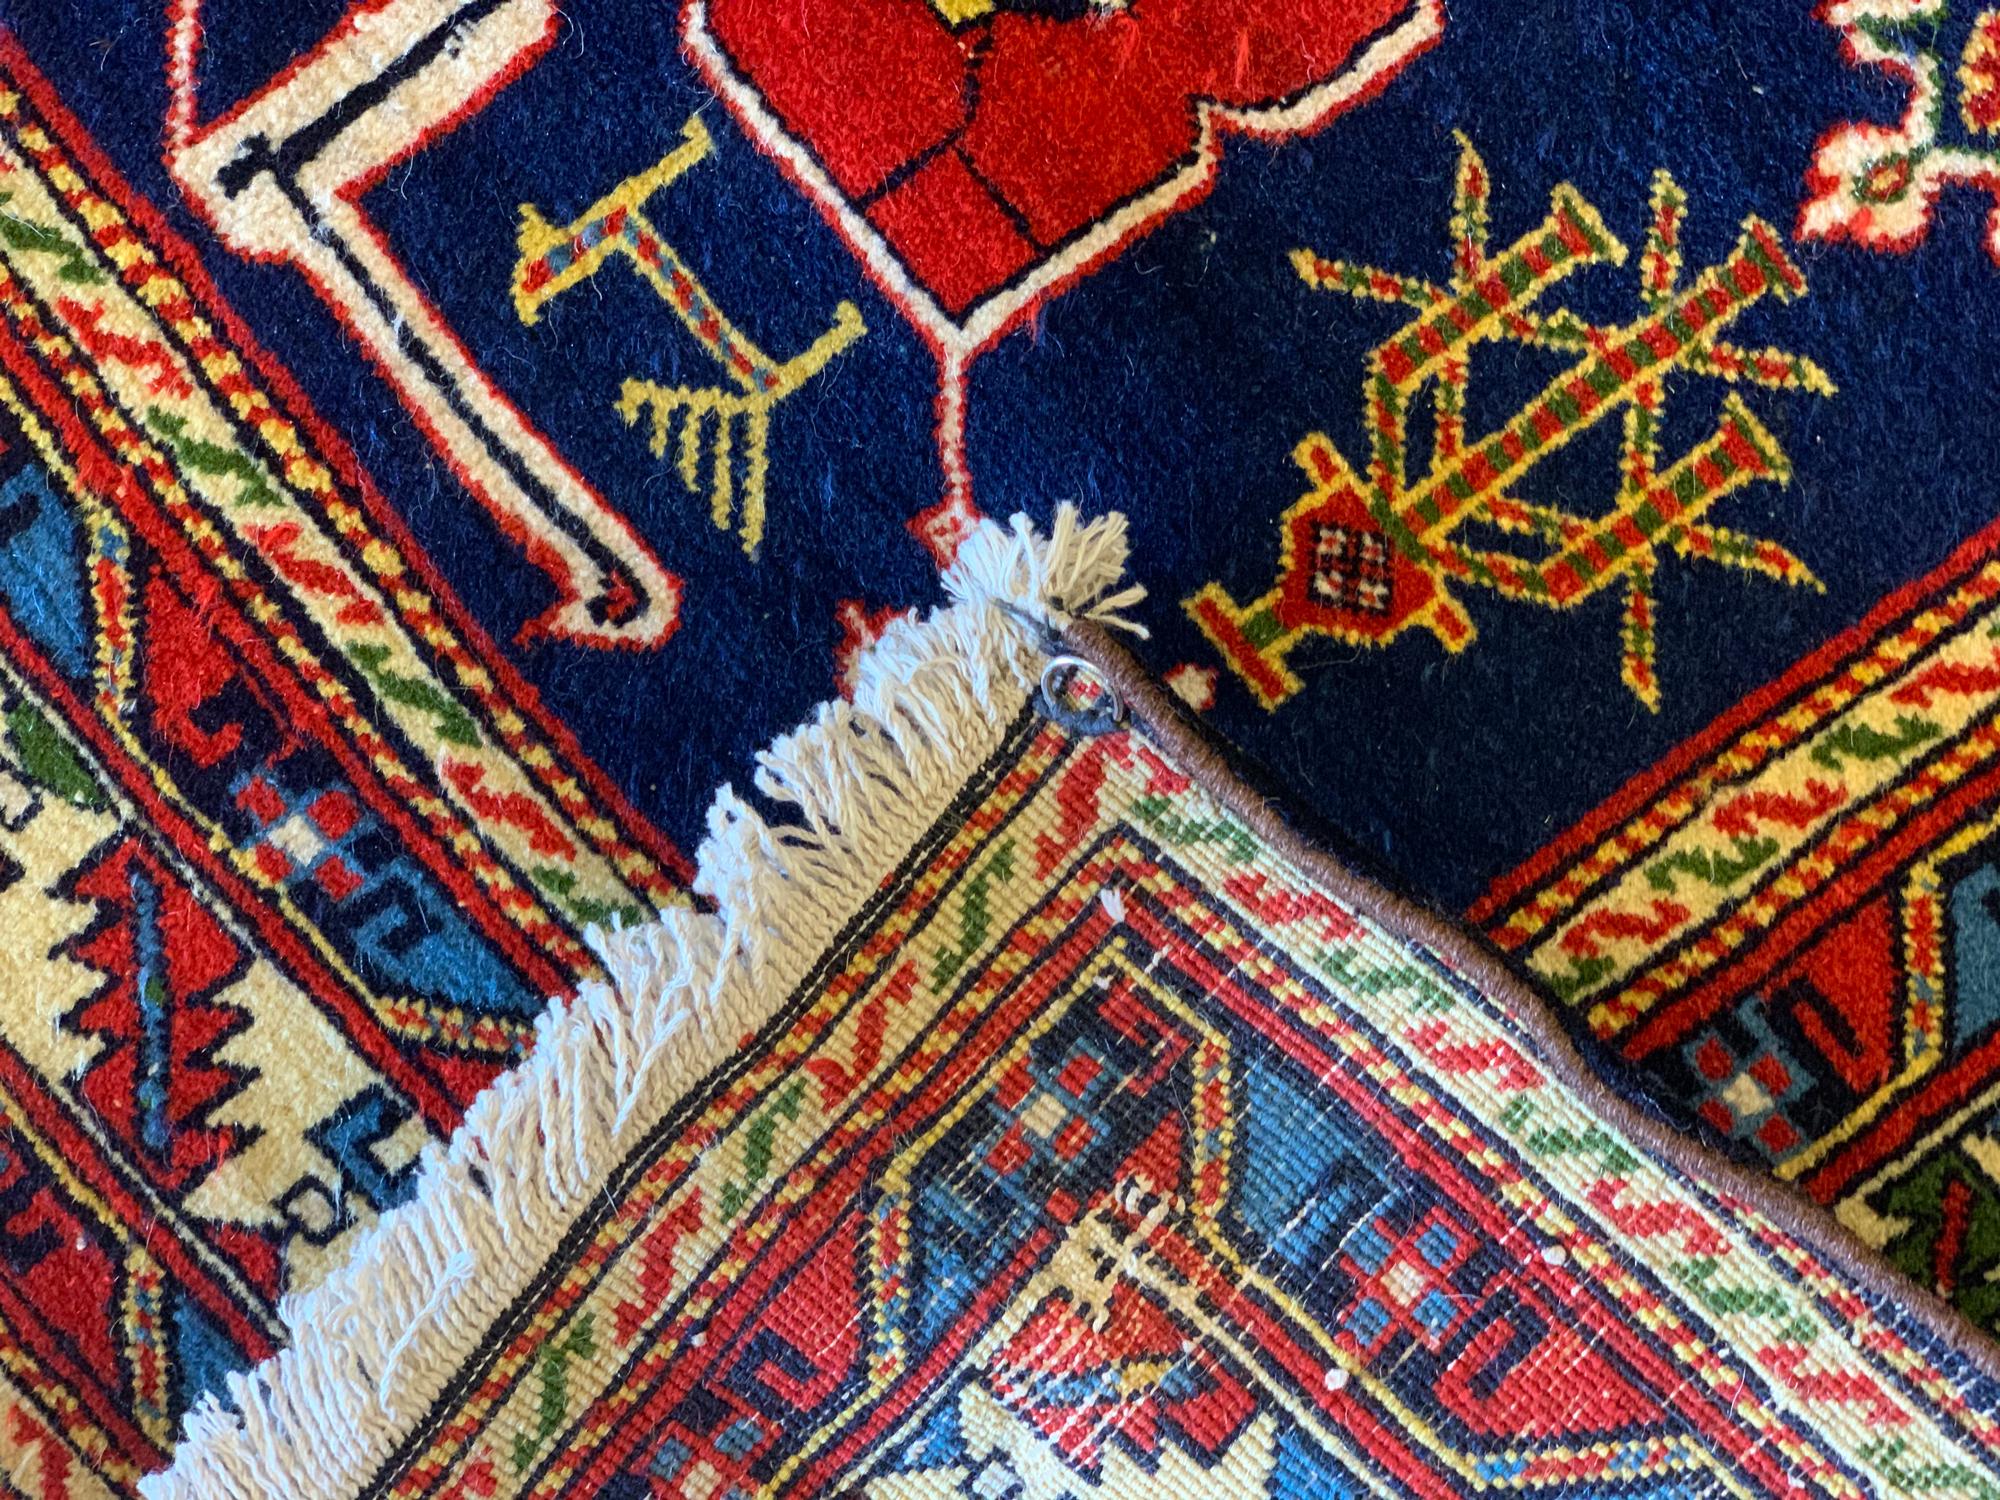 Collectible KaraKashli Rug Antique Shirvan Rug Handwoven Wool Carpet In Excellent Condition For Sale In Hampshire, GB